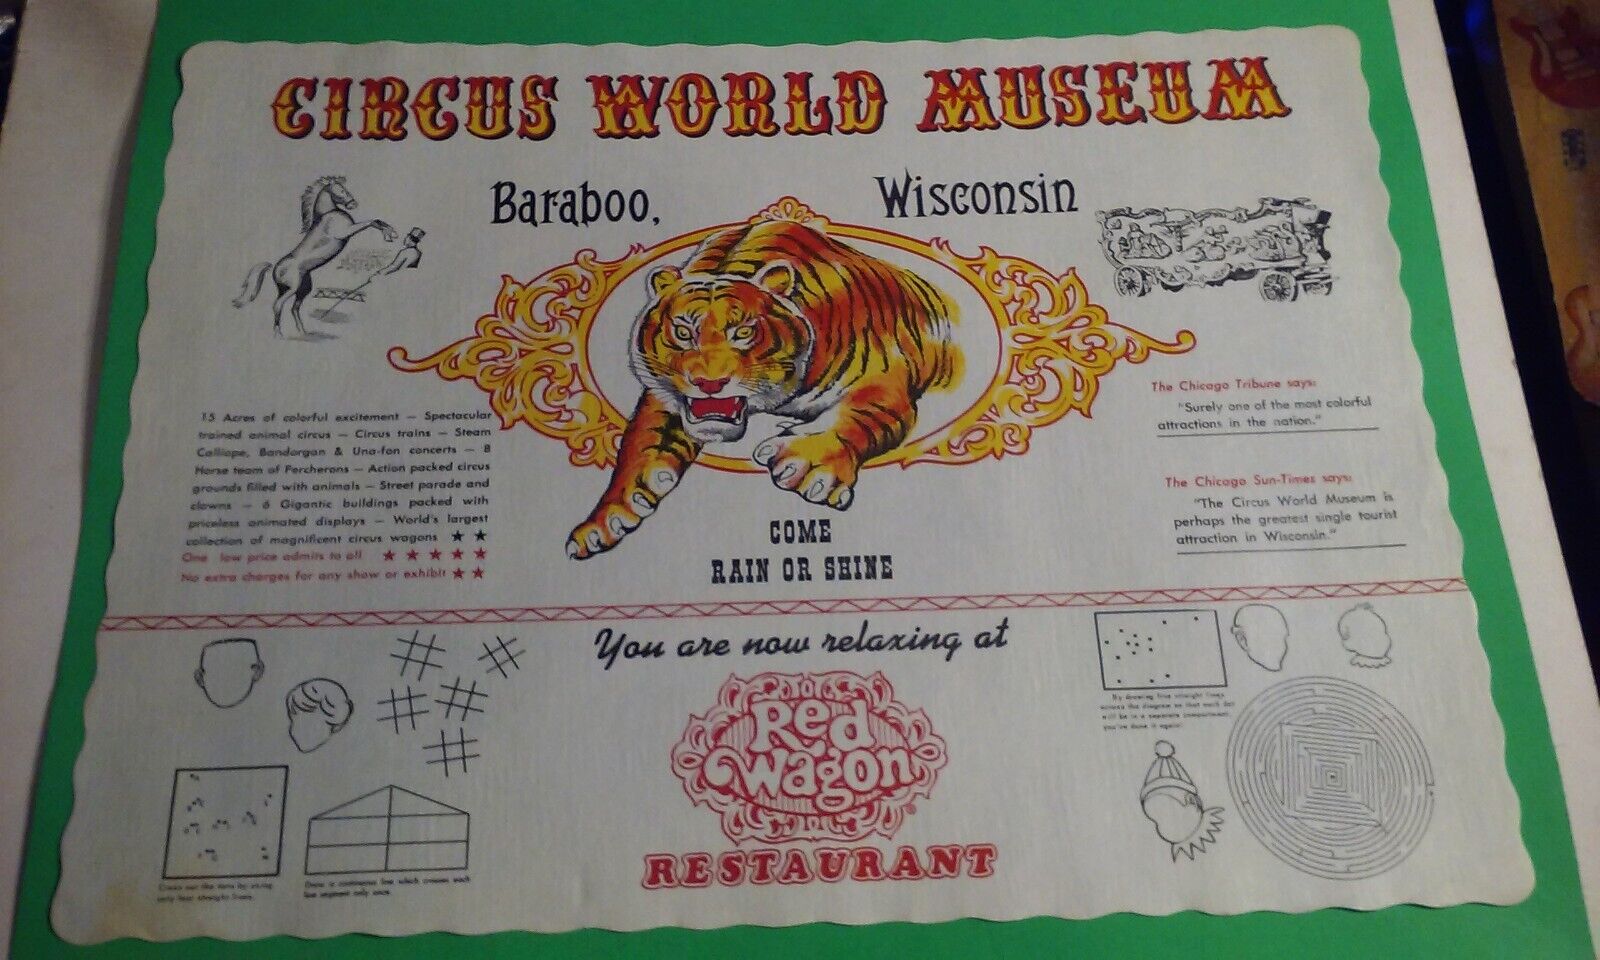 Red Wagon Restaurant Placemat Advertising Paper 80s Baraboo Circus World Museum